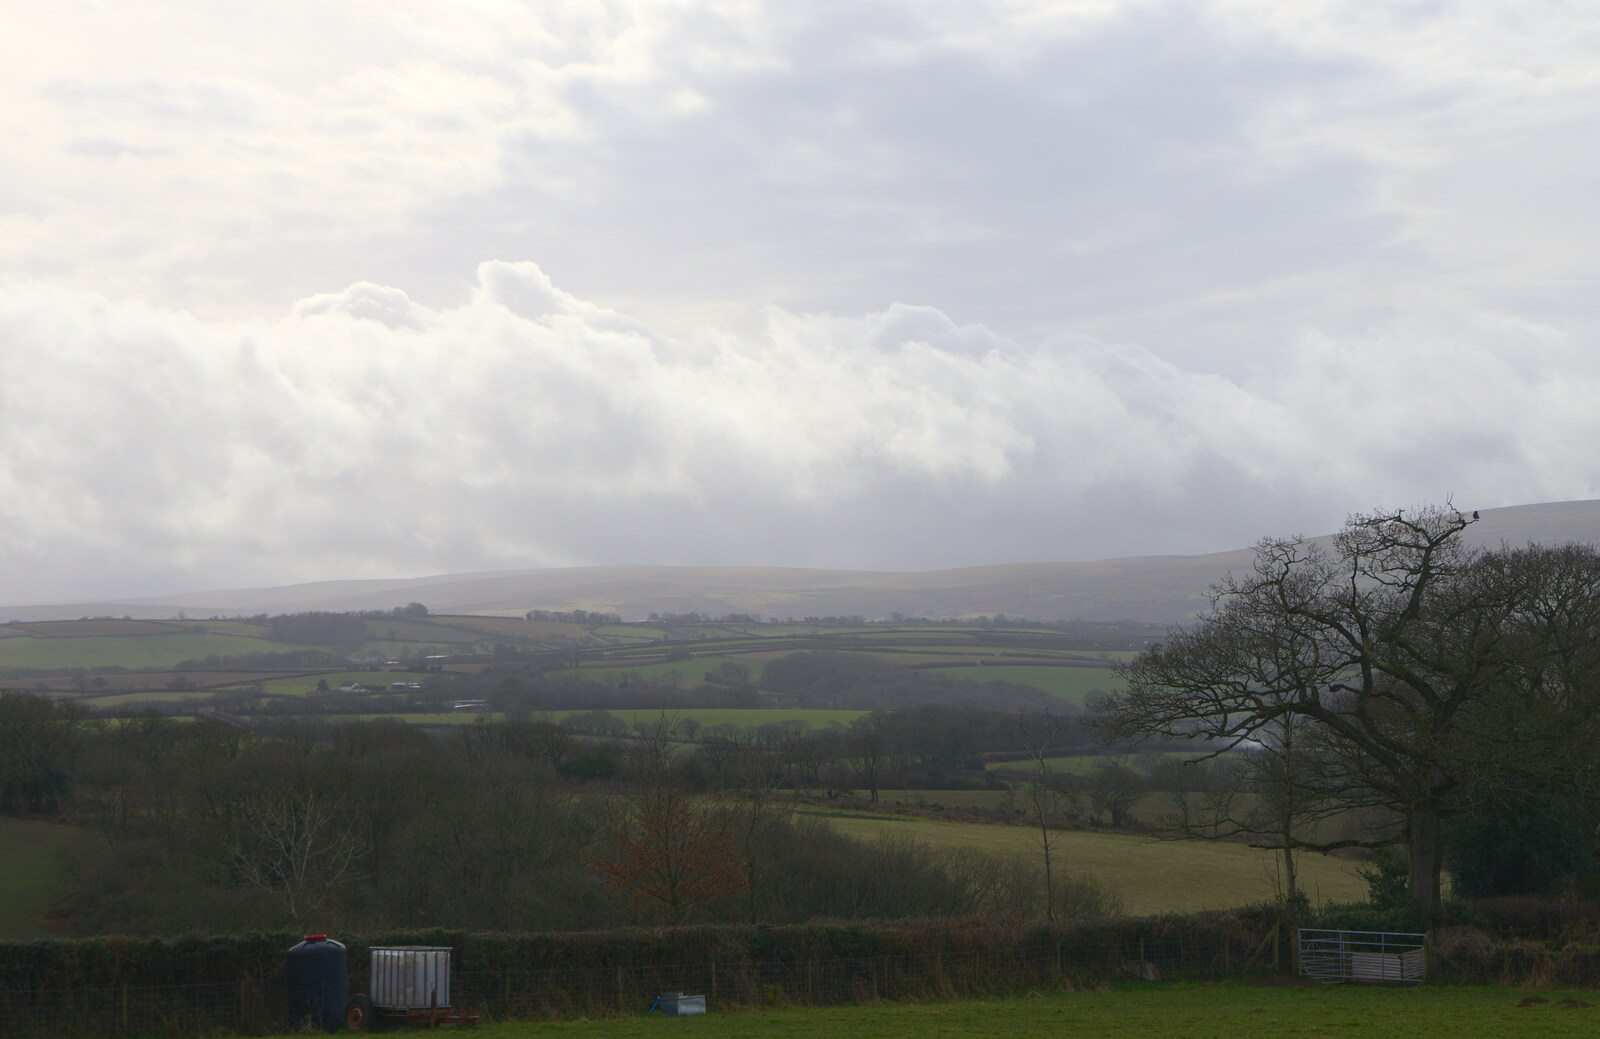 The view towards Dartmoor, from the shop from A Trip to Grandma J's, Spreyton, Devon - 18th February 2015